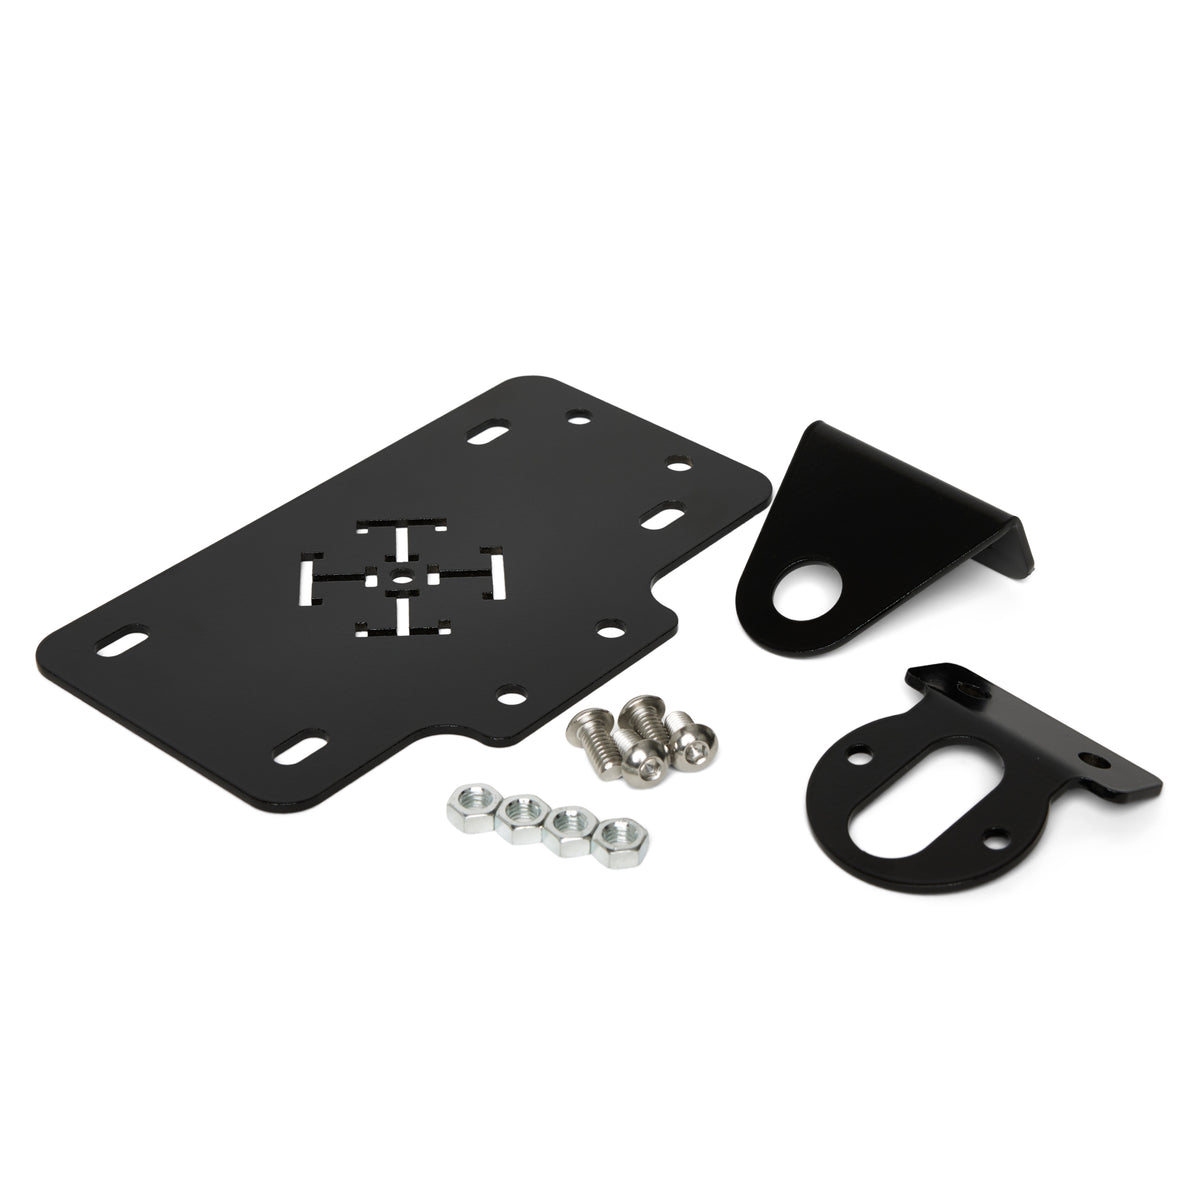 Protech PROTECH License Plate Bracket X-SHAPE For various models